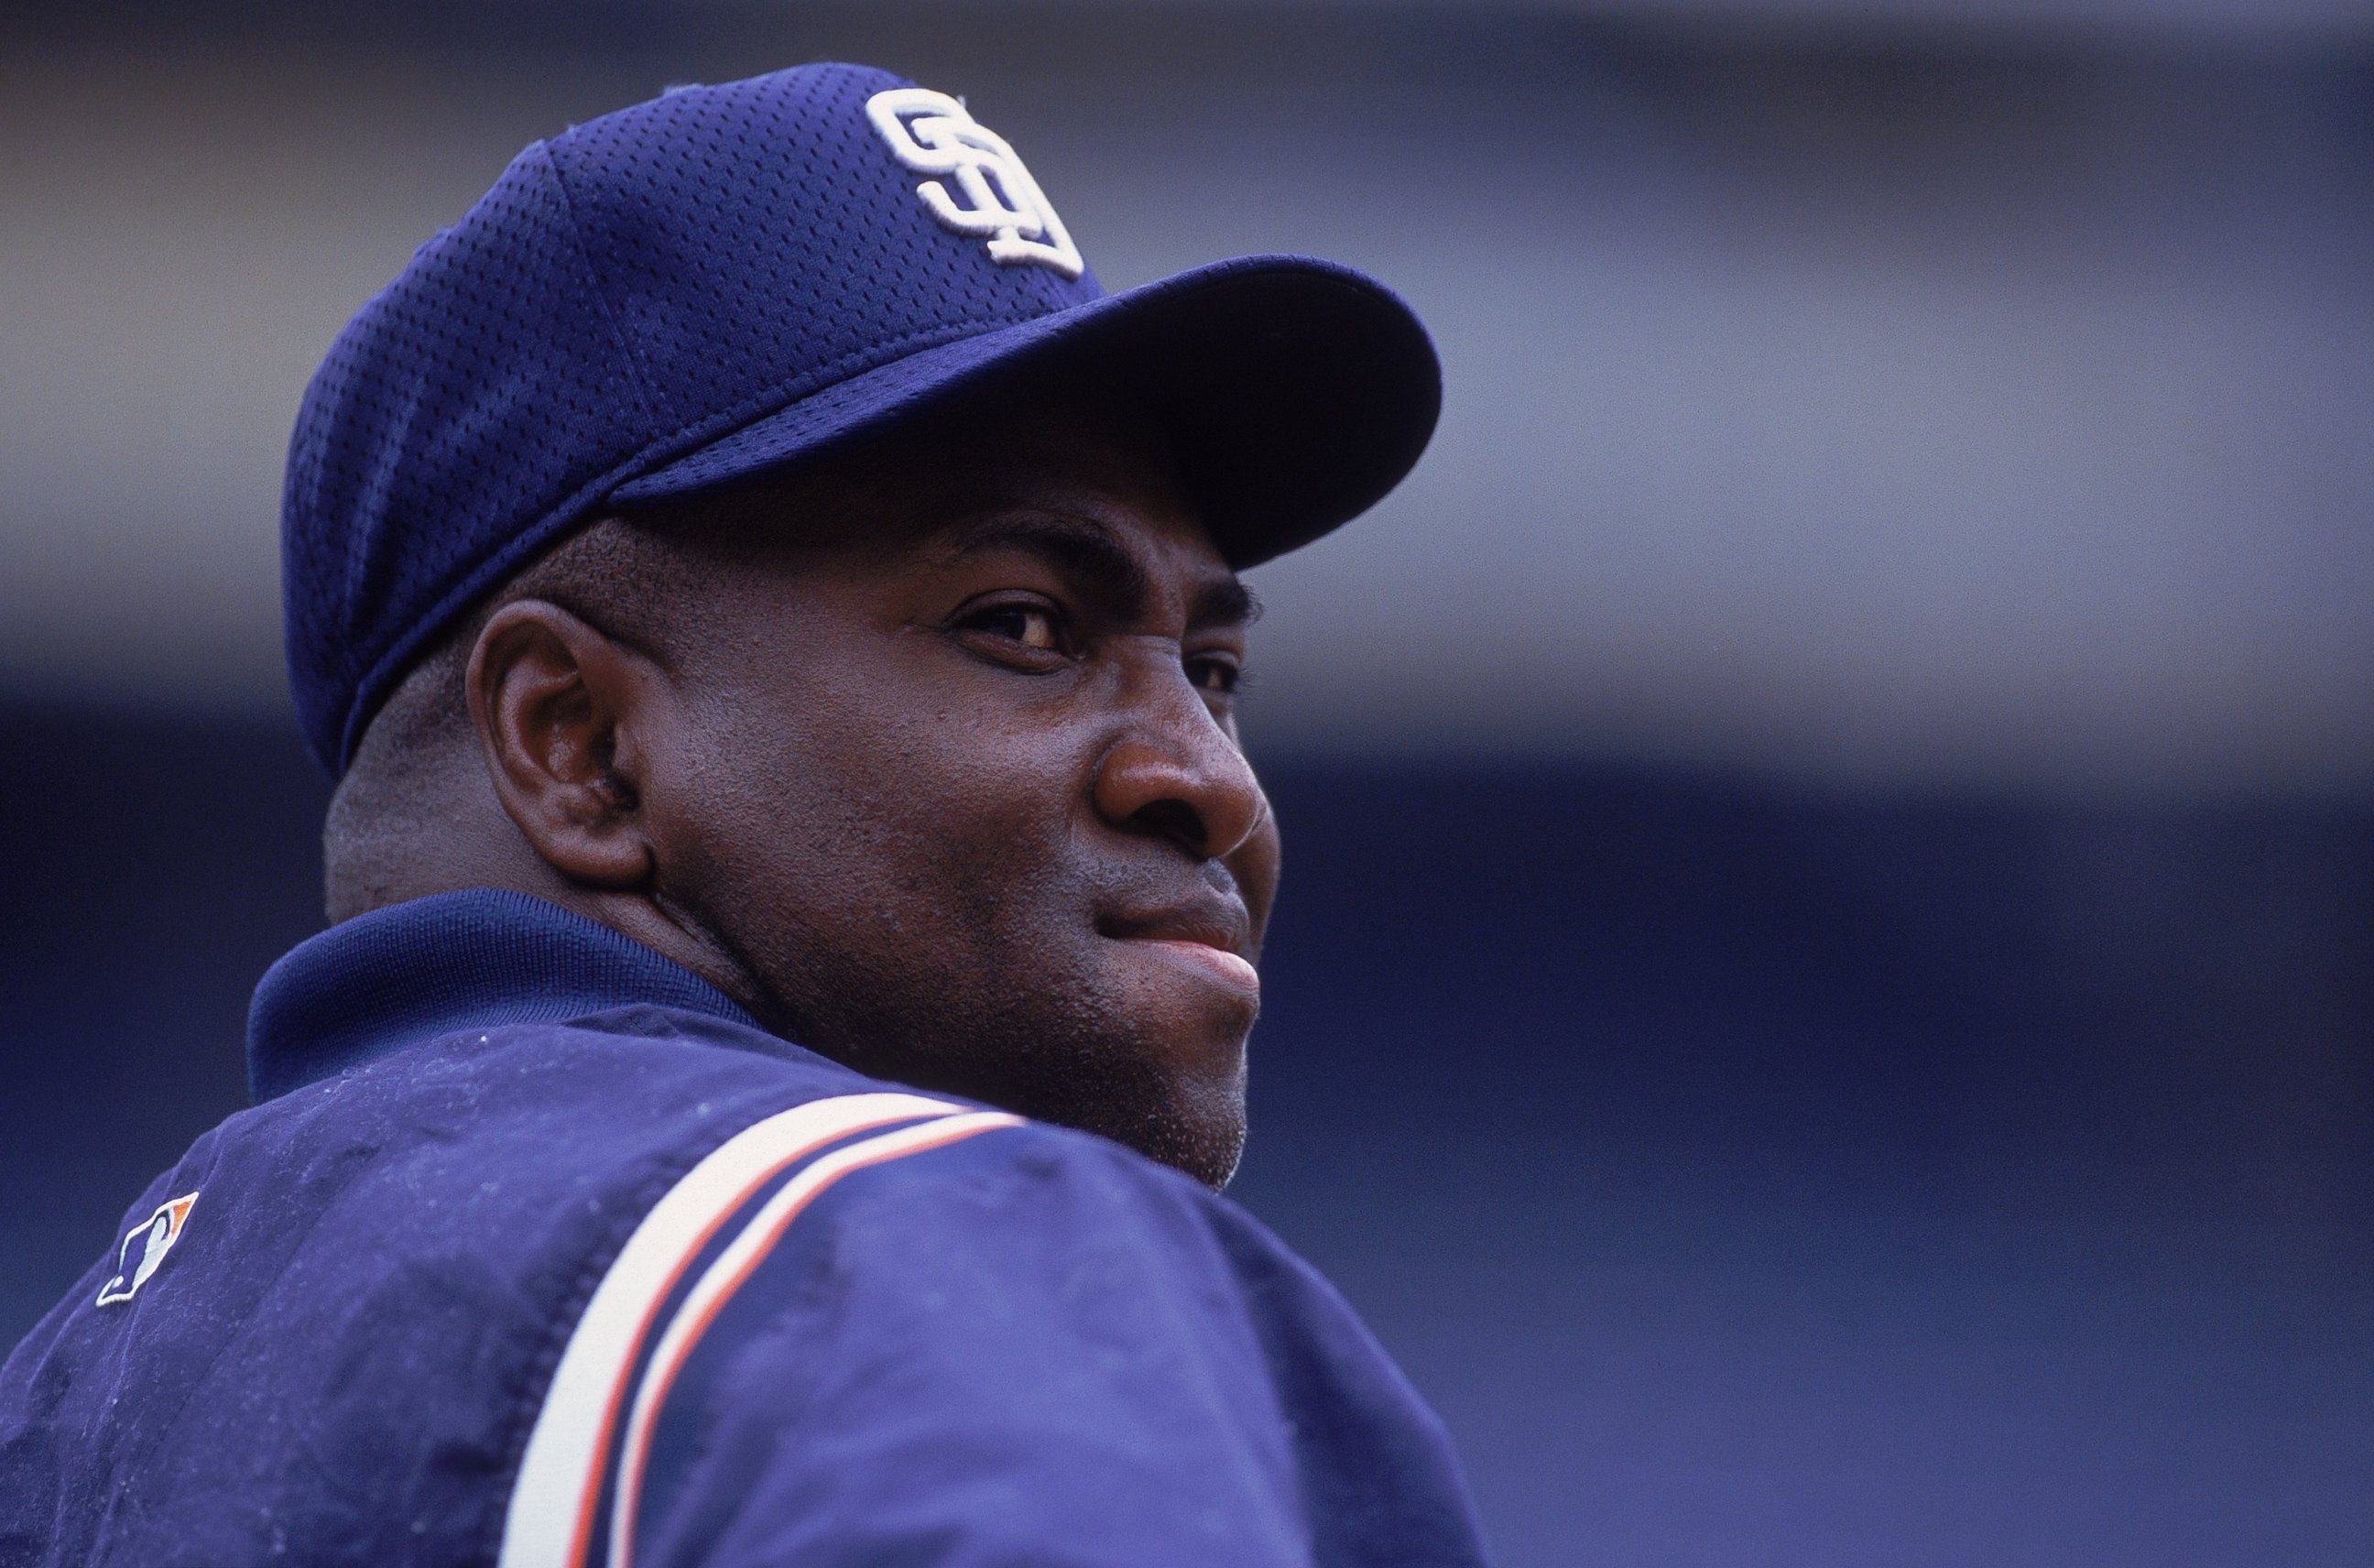 PHOTO: Tony Gwynn #19 of the San Diego Padres looks on during the game against the Arizona Diamondbacks at Qualcomm Stadium in San Diego, Calif. on May 24, 2001. 